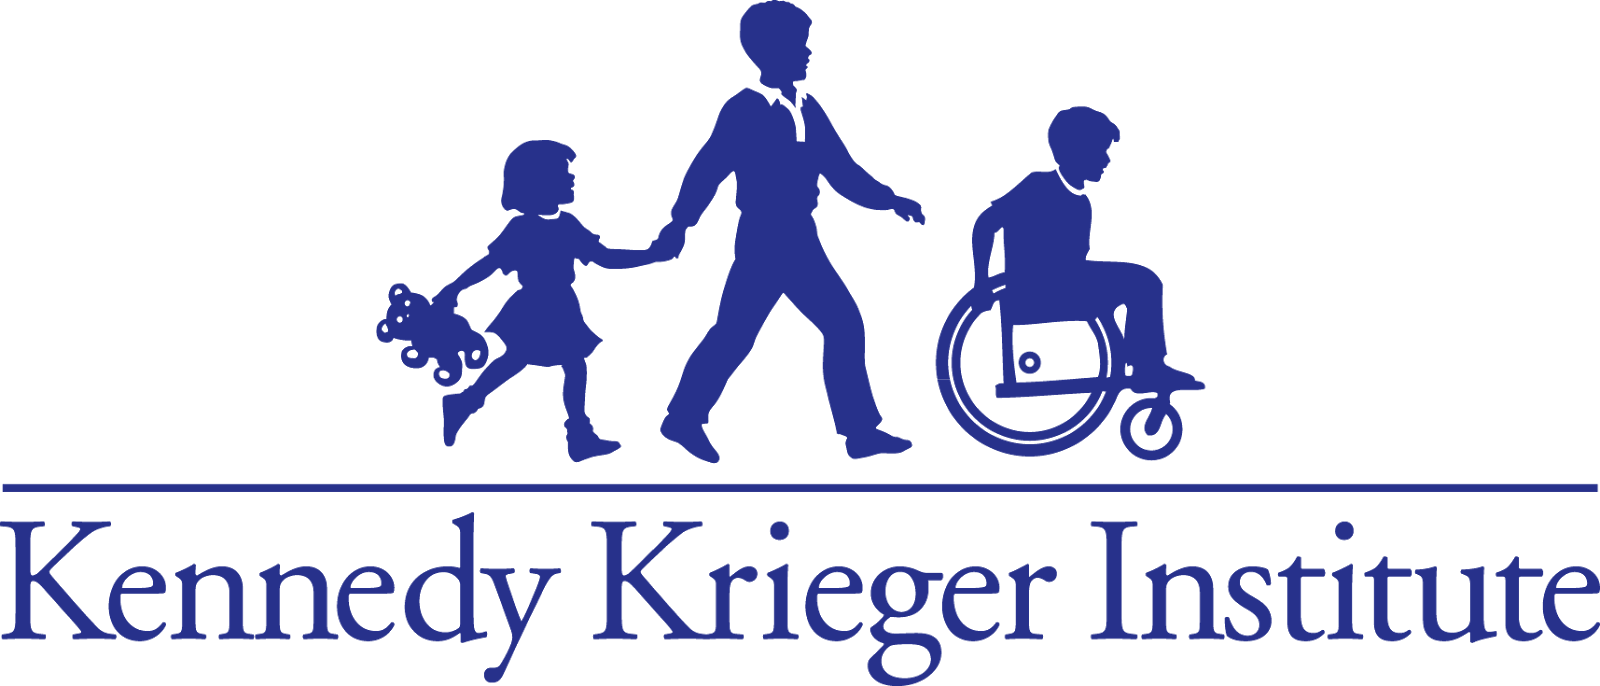 Hugo W. Moser Research Institute at Kennedy Krieger